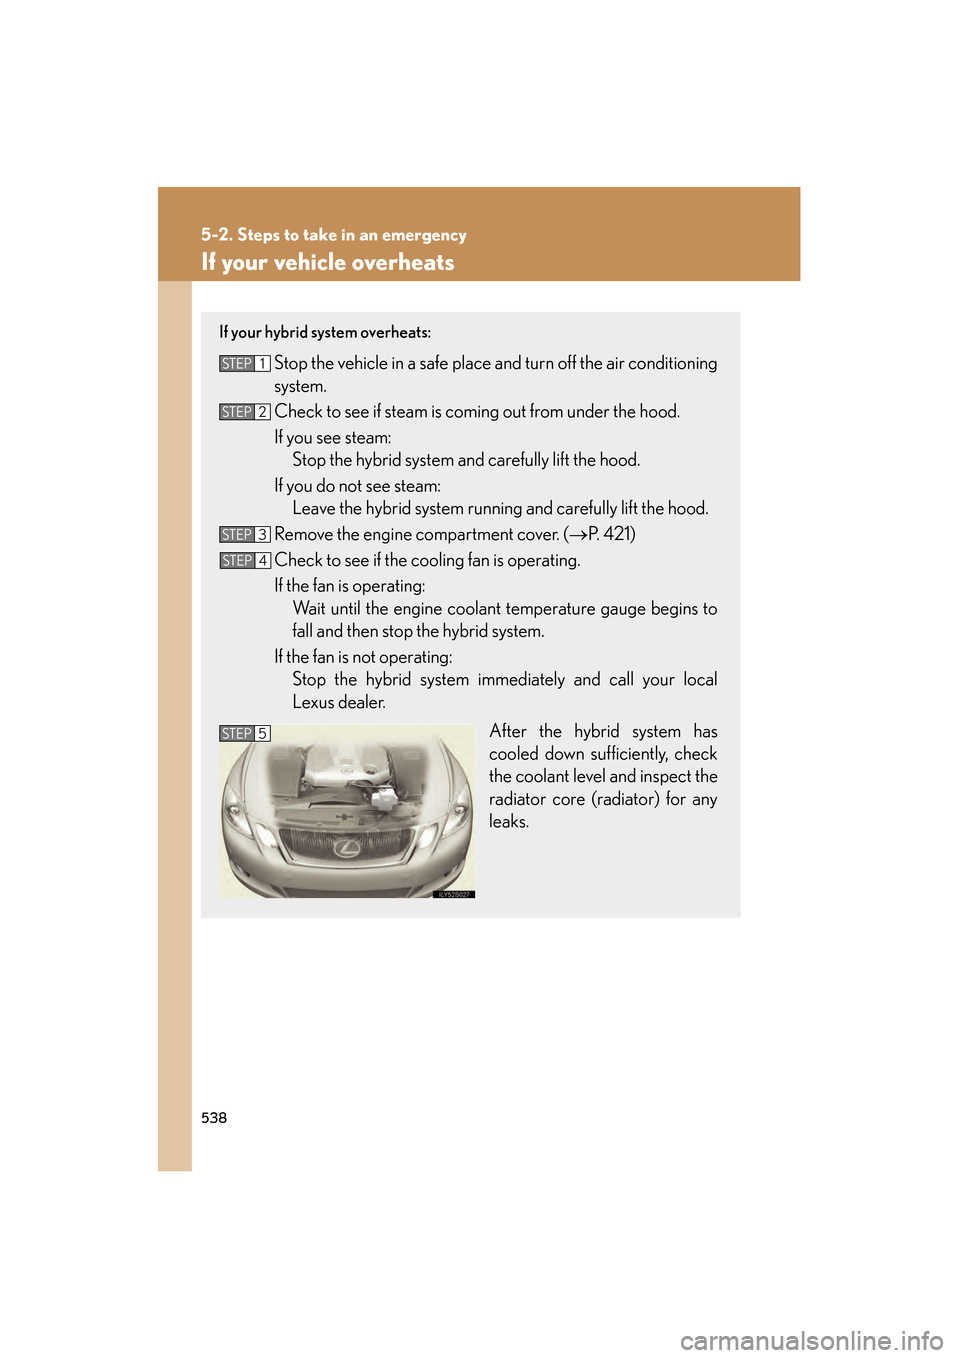 Lexus GS450h 2008  Owners Manual 538
5-2. Steps to take in an emergency
GS_HV_U
June 19, 2008 1:15 pm
If your vehicle overheats
If your hybrid system overheats: 
Stop the vehicle in a safe place and turn off the air conditioning
syst